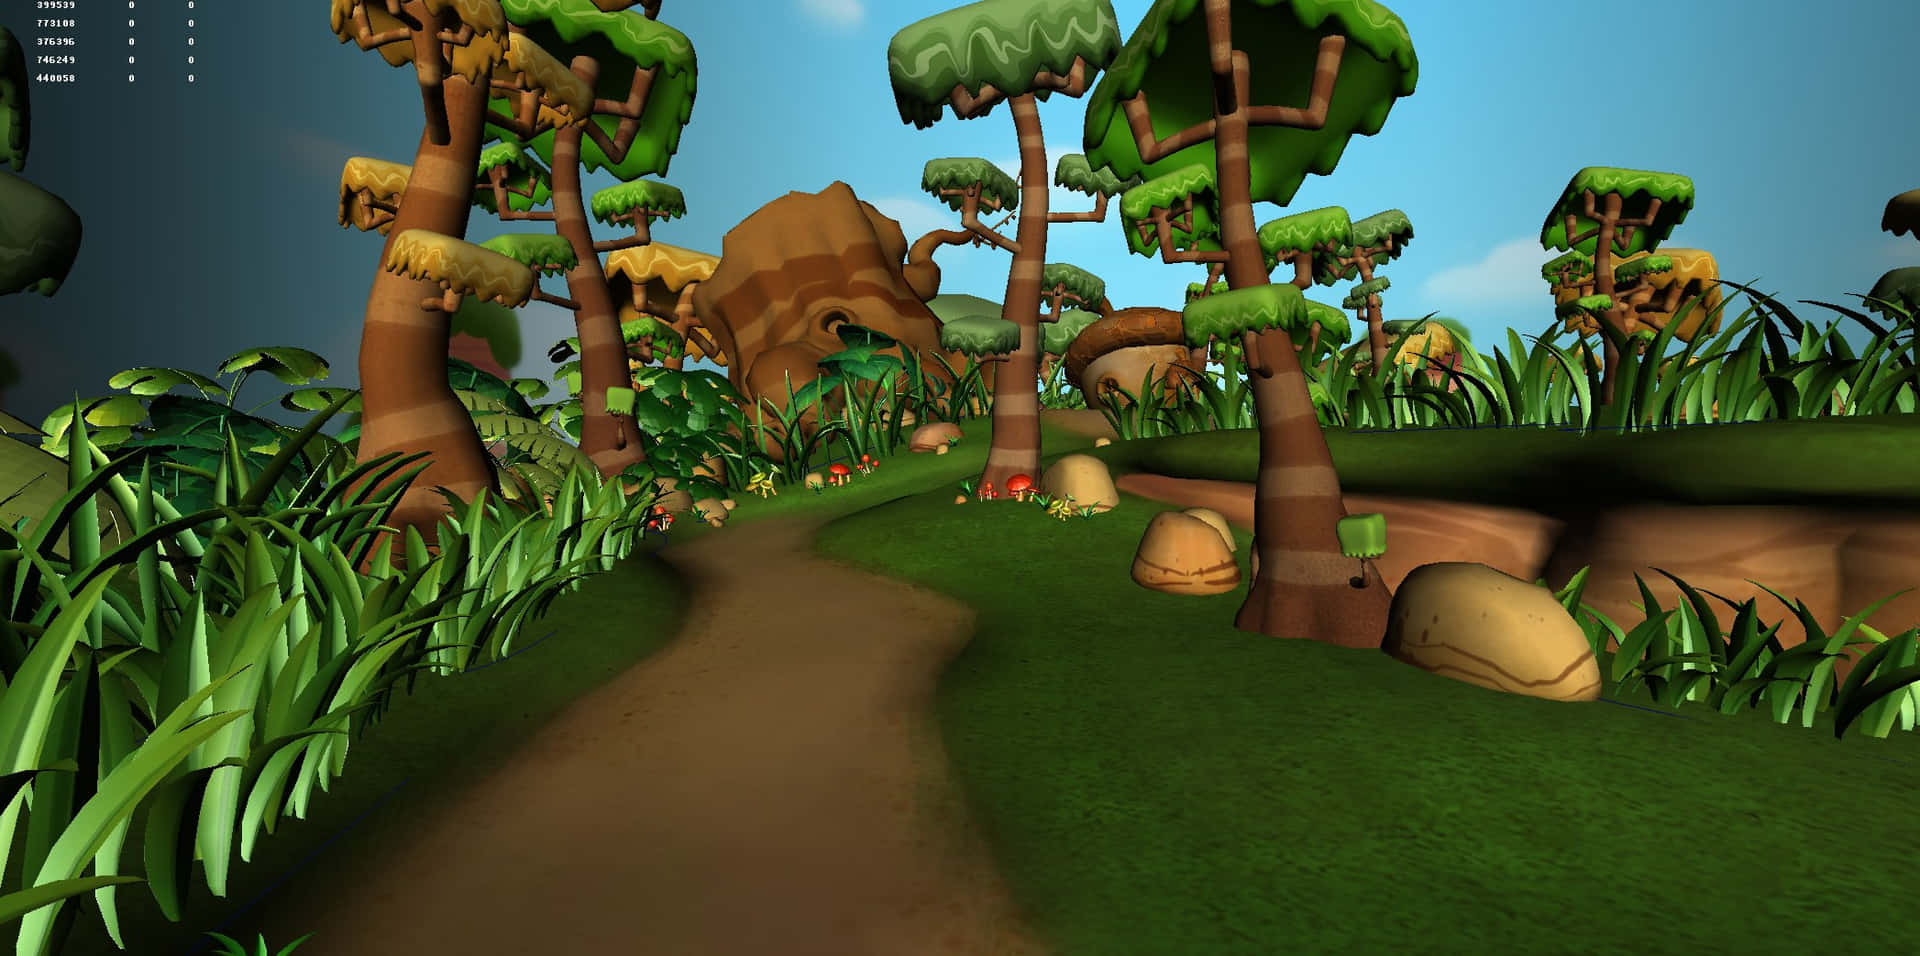 A 3d Scene With Trees And Grass